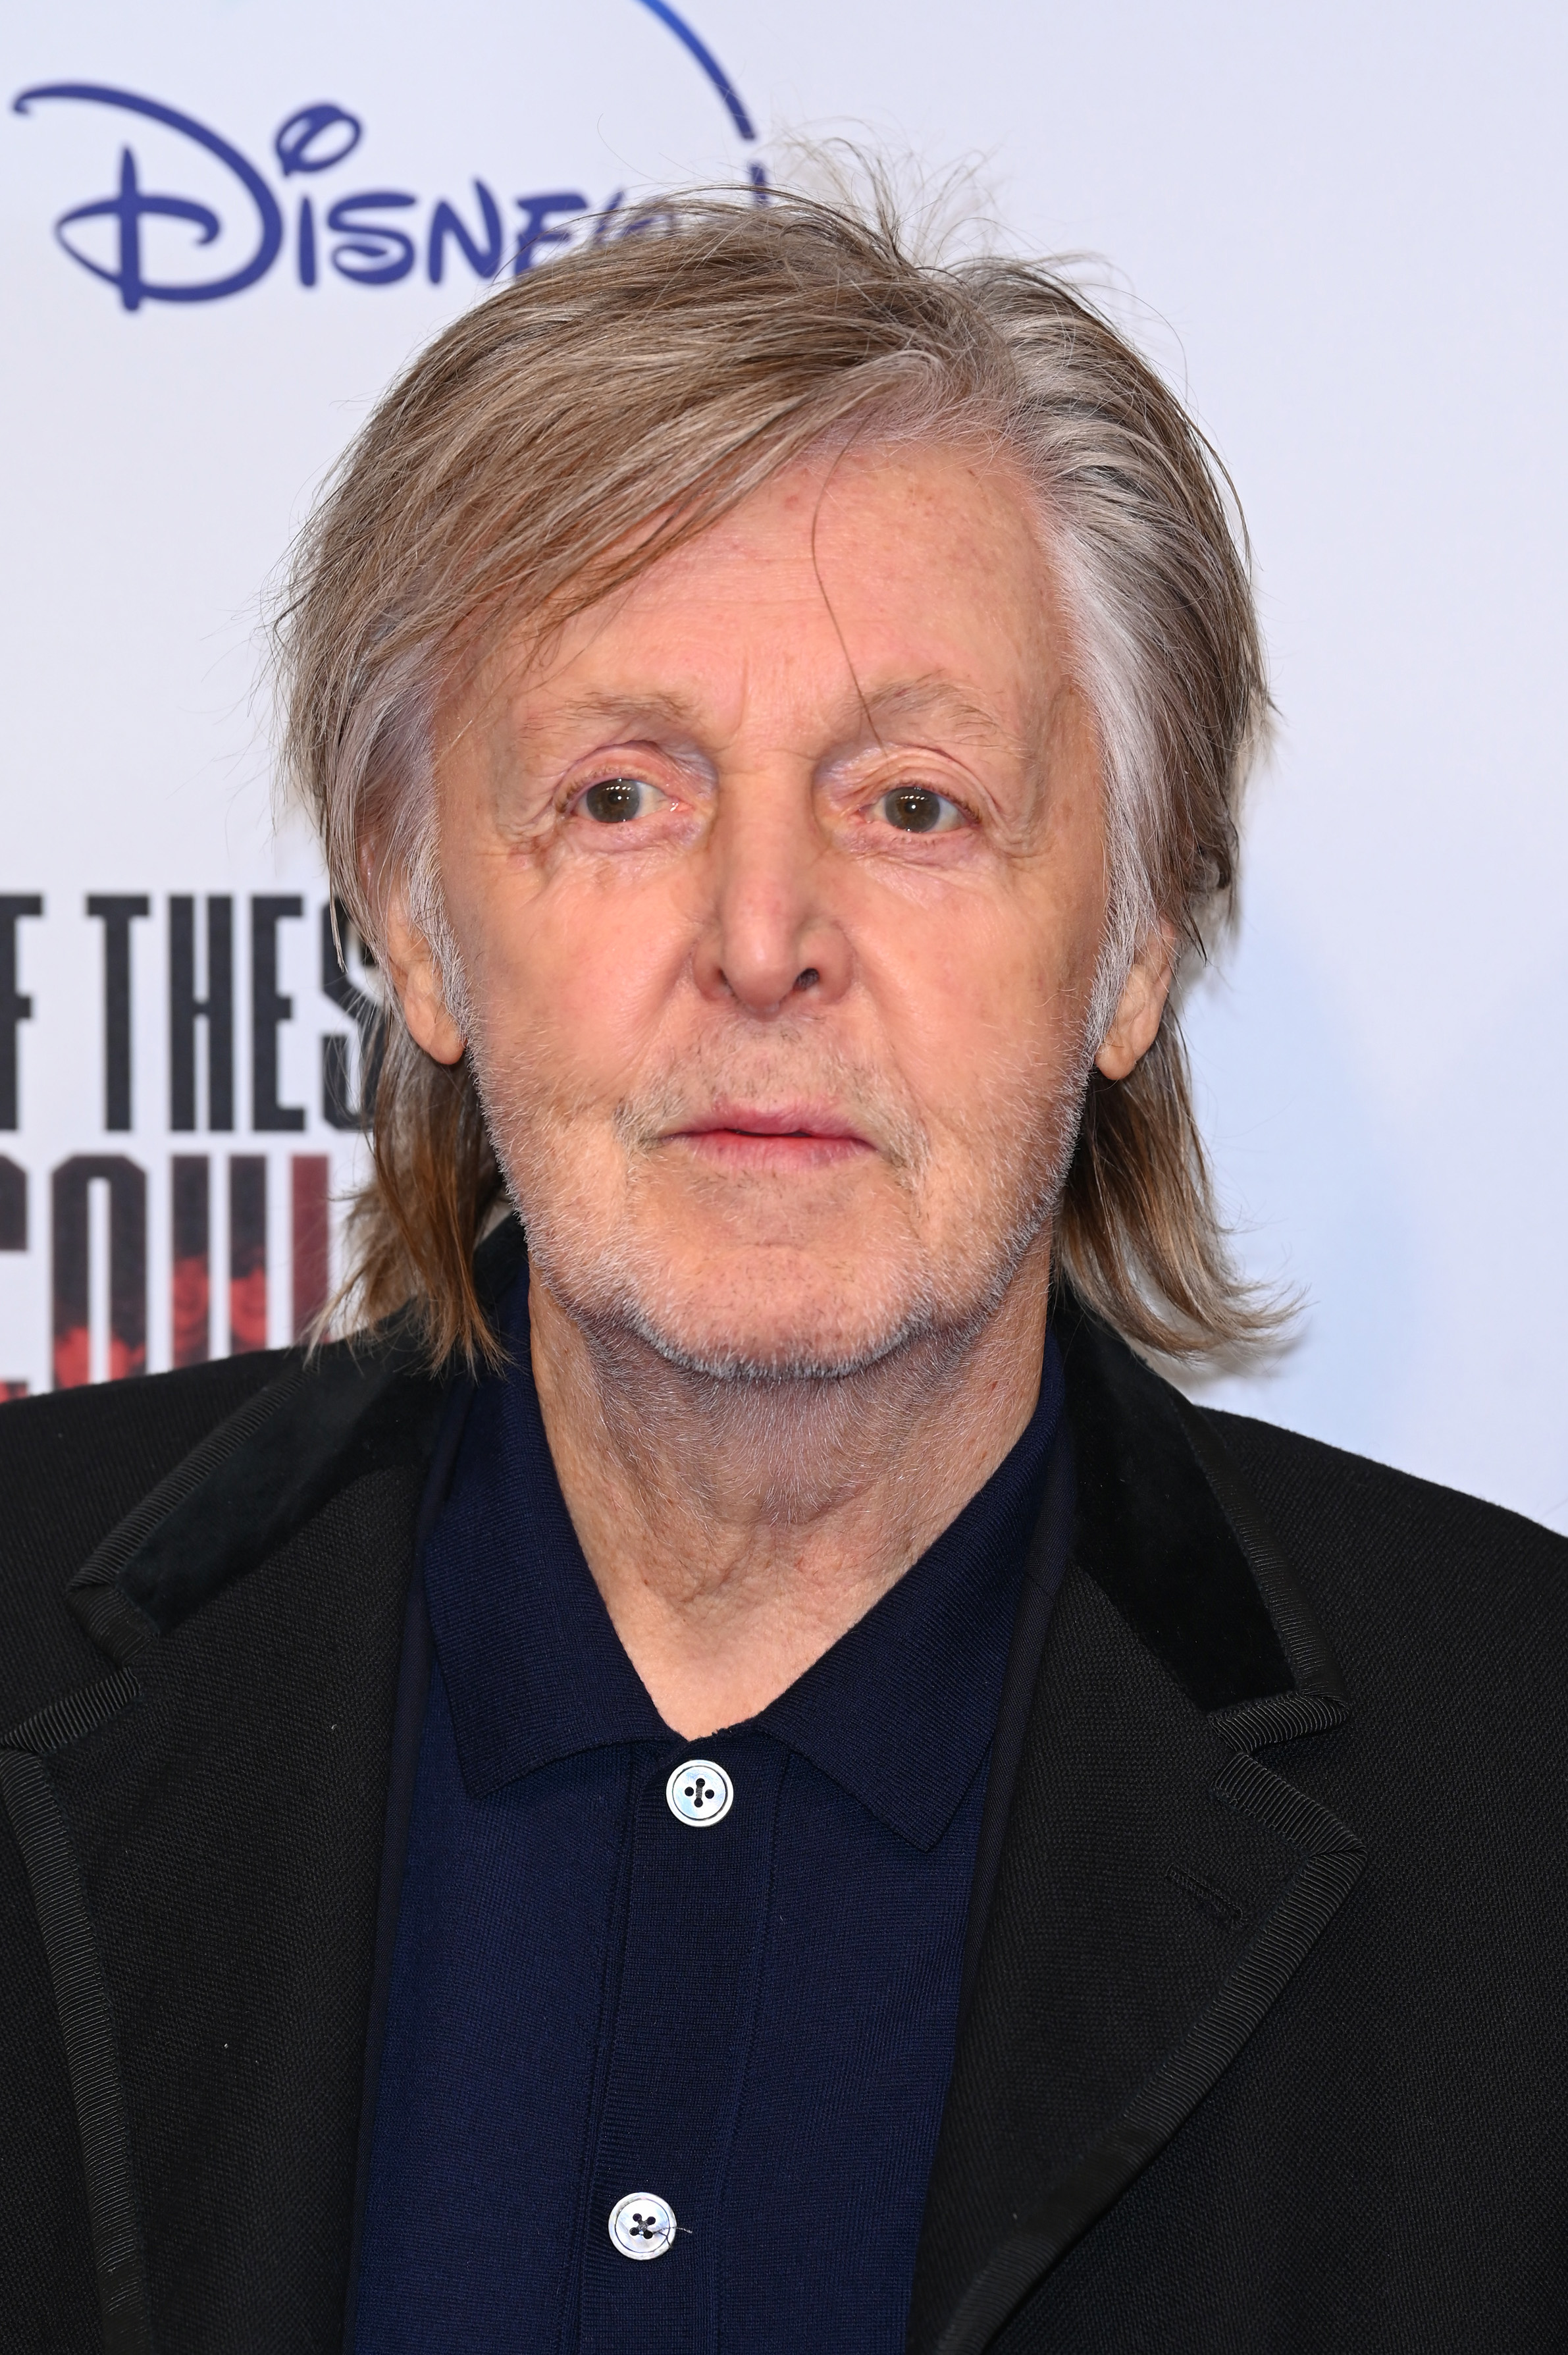 Sir Paul McCartney at the UK premiere of "If These Walls Could Sing" on December 12, 2022, in London. | Source: Getty Images